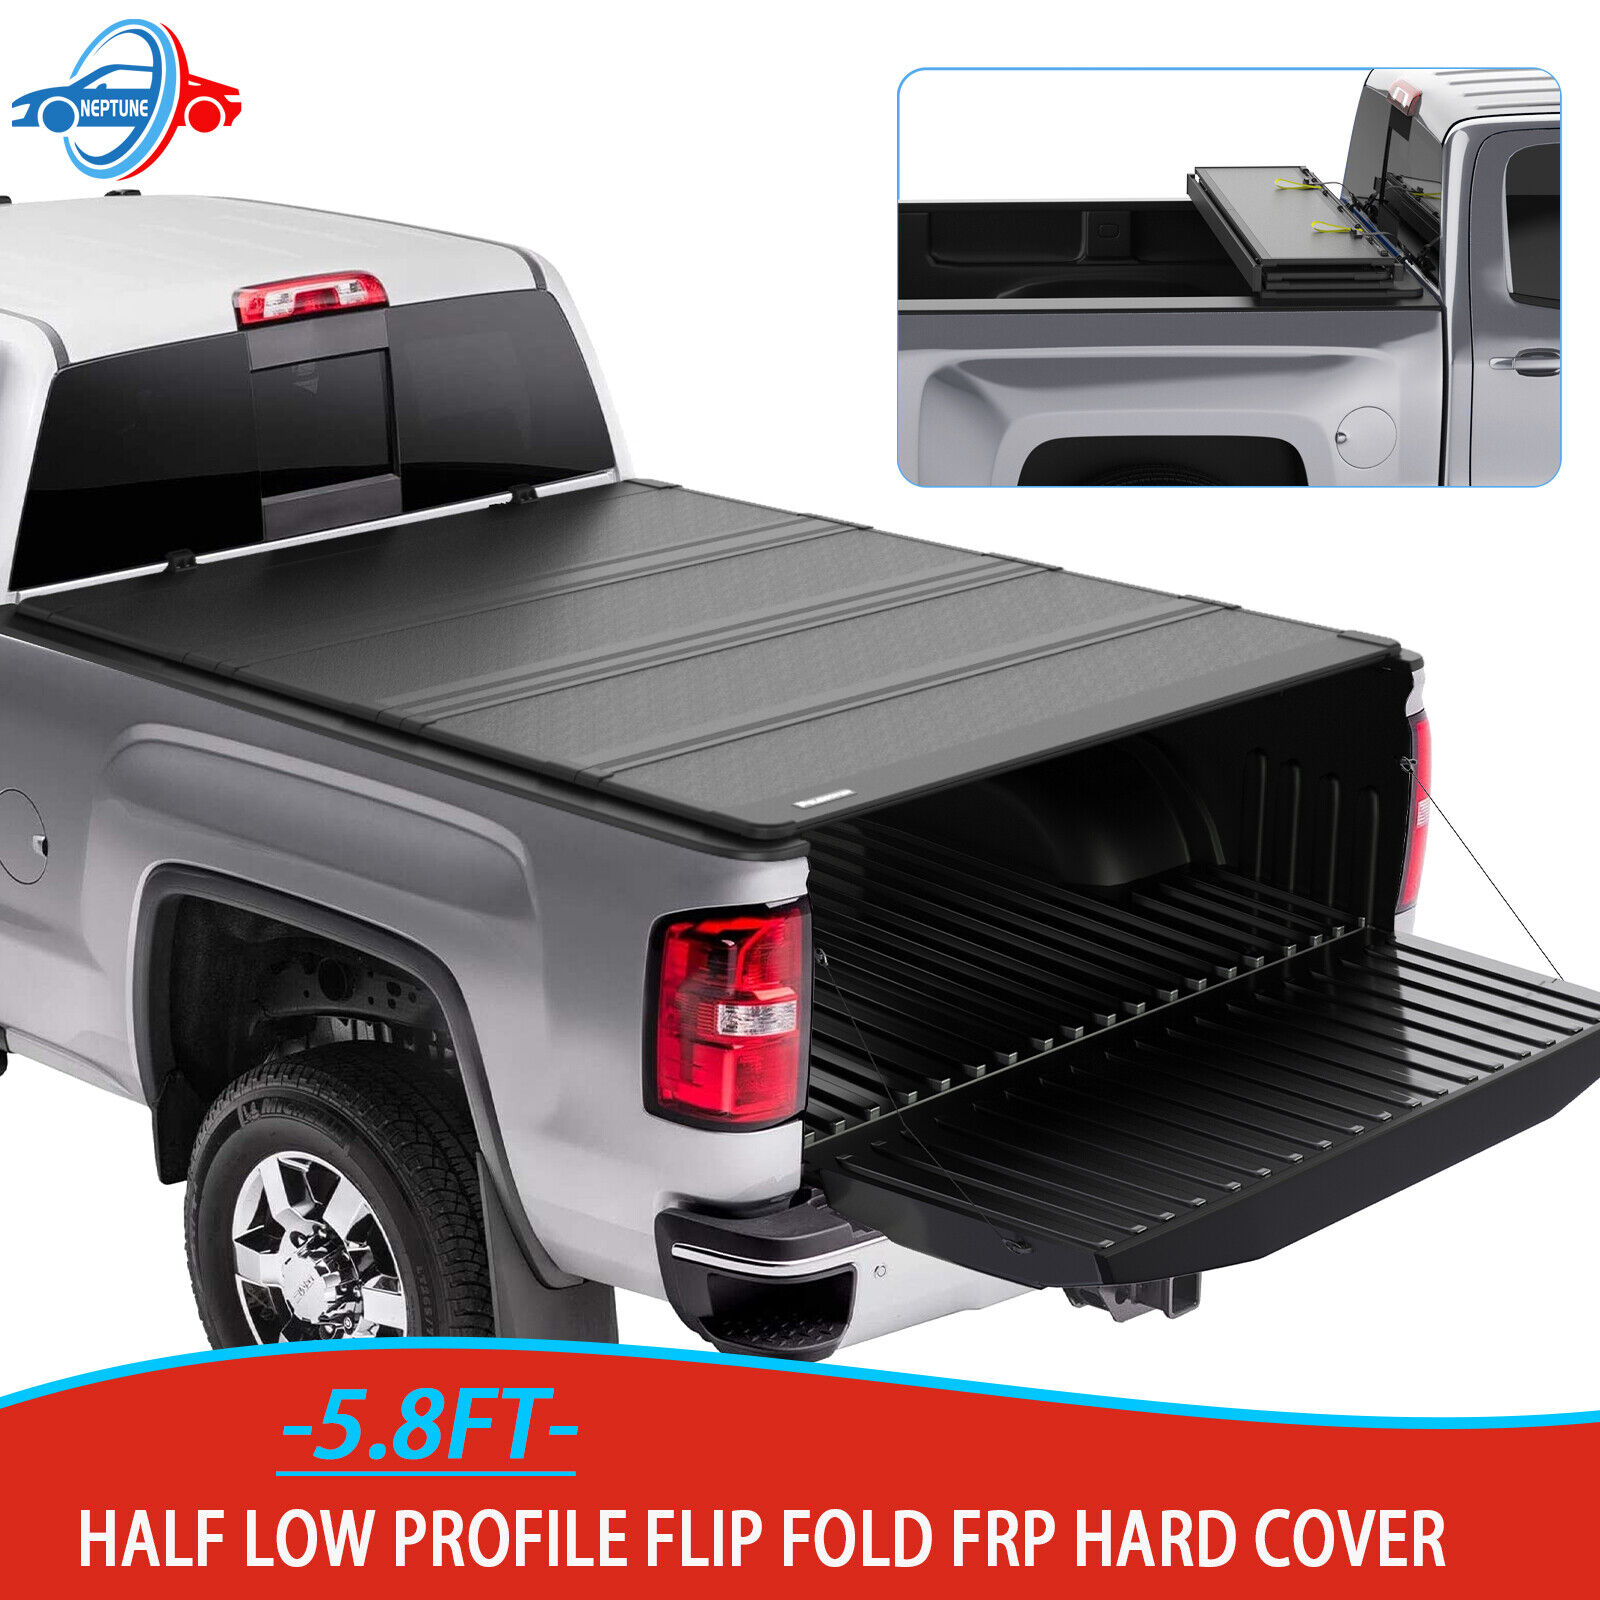 5.7FT Hard Tonneau Cover Low Profile FRP For 2009-2018 Dodge Ram 1500 Truck Bed